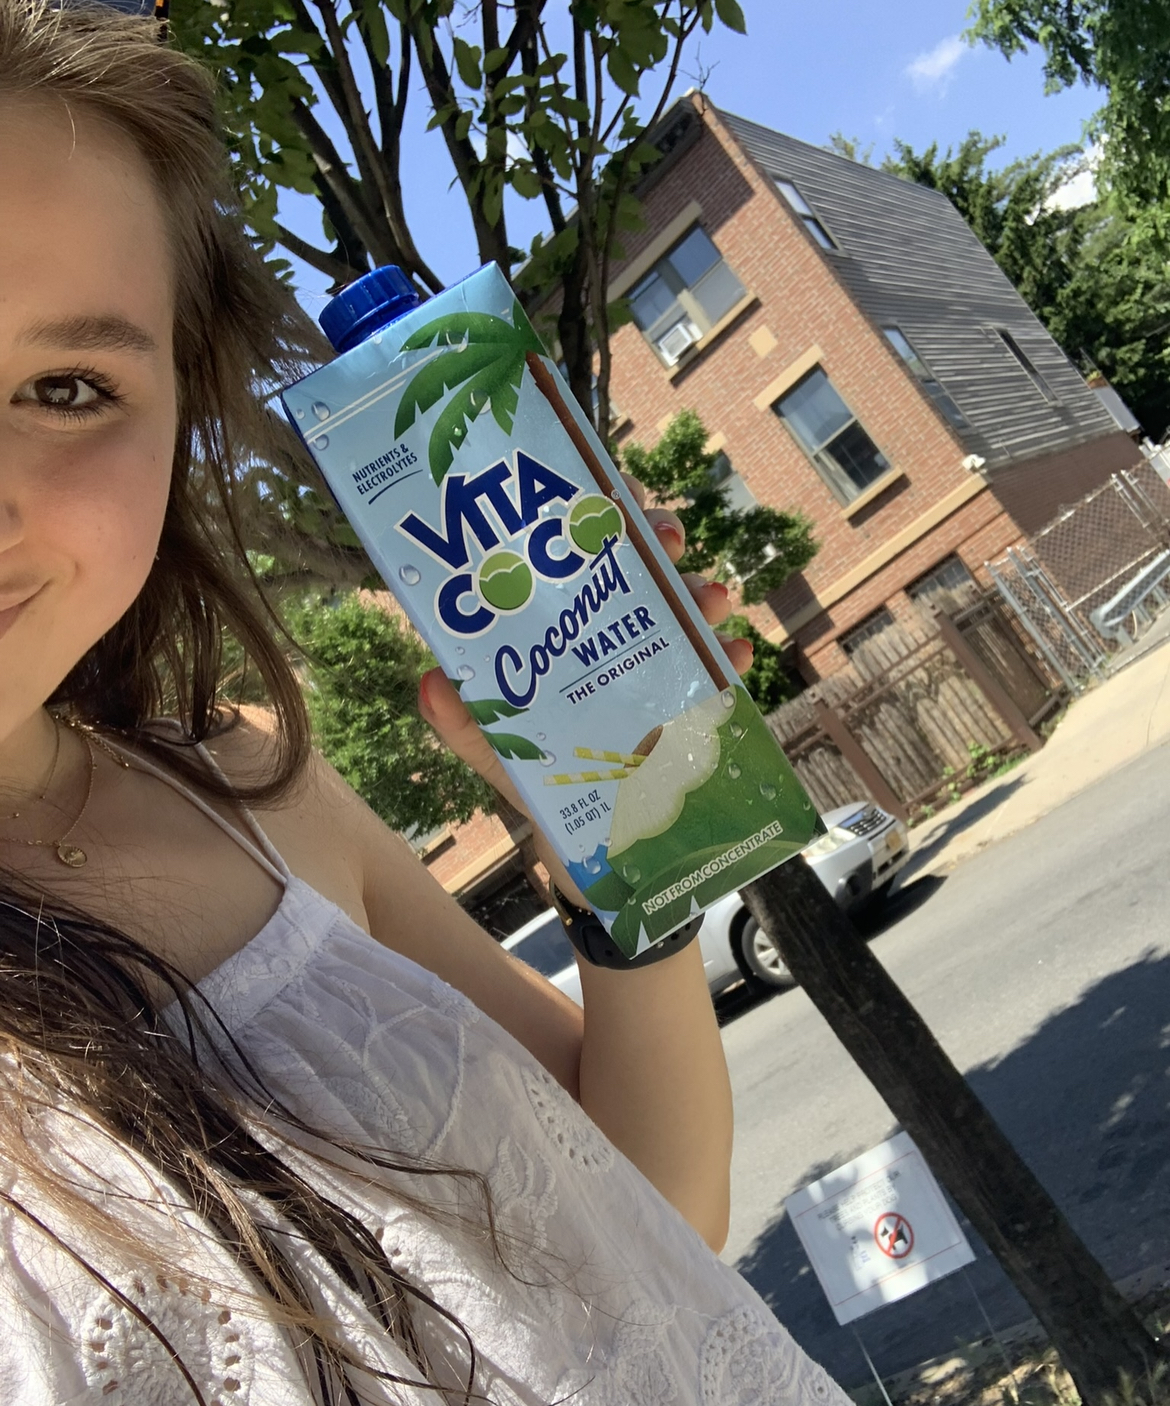 The author holding up a carton of Vita Coco coconut water.